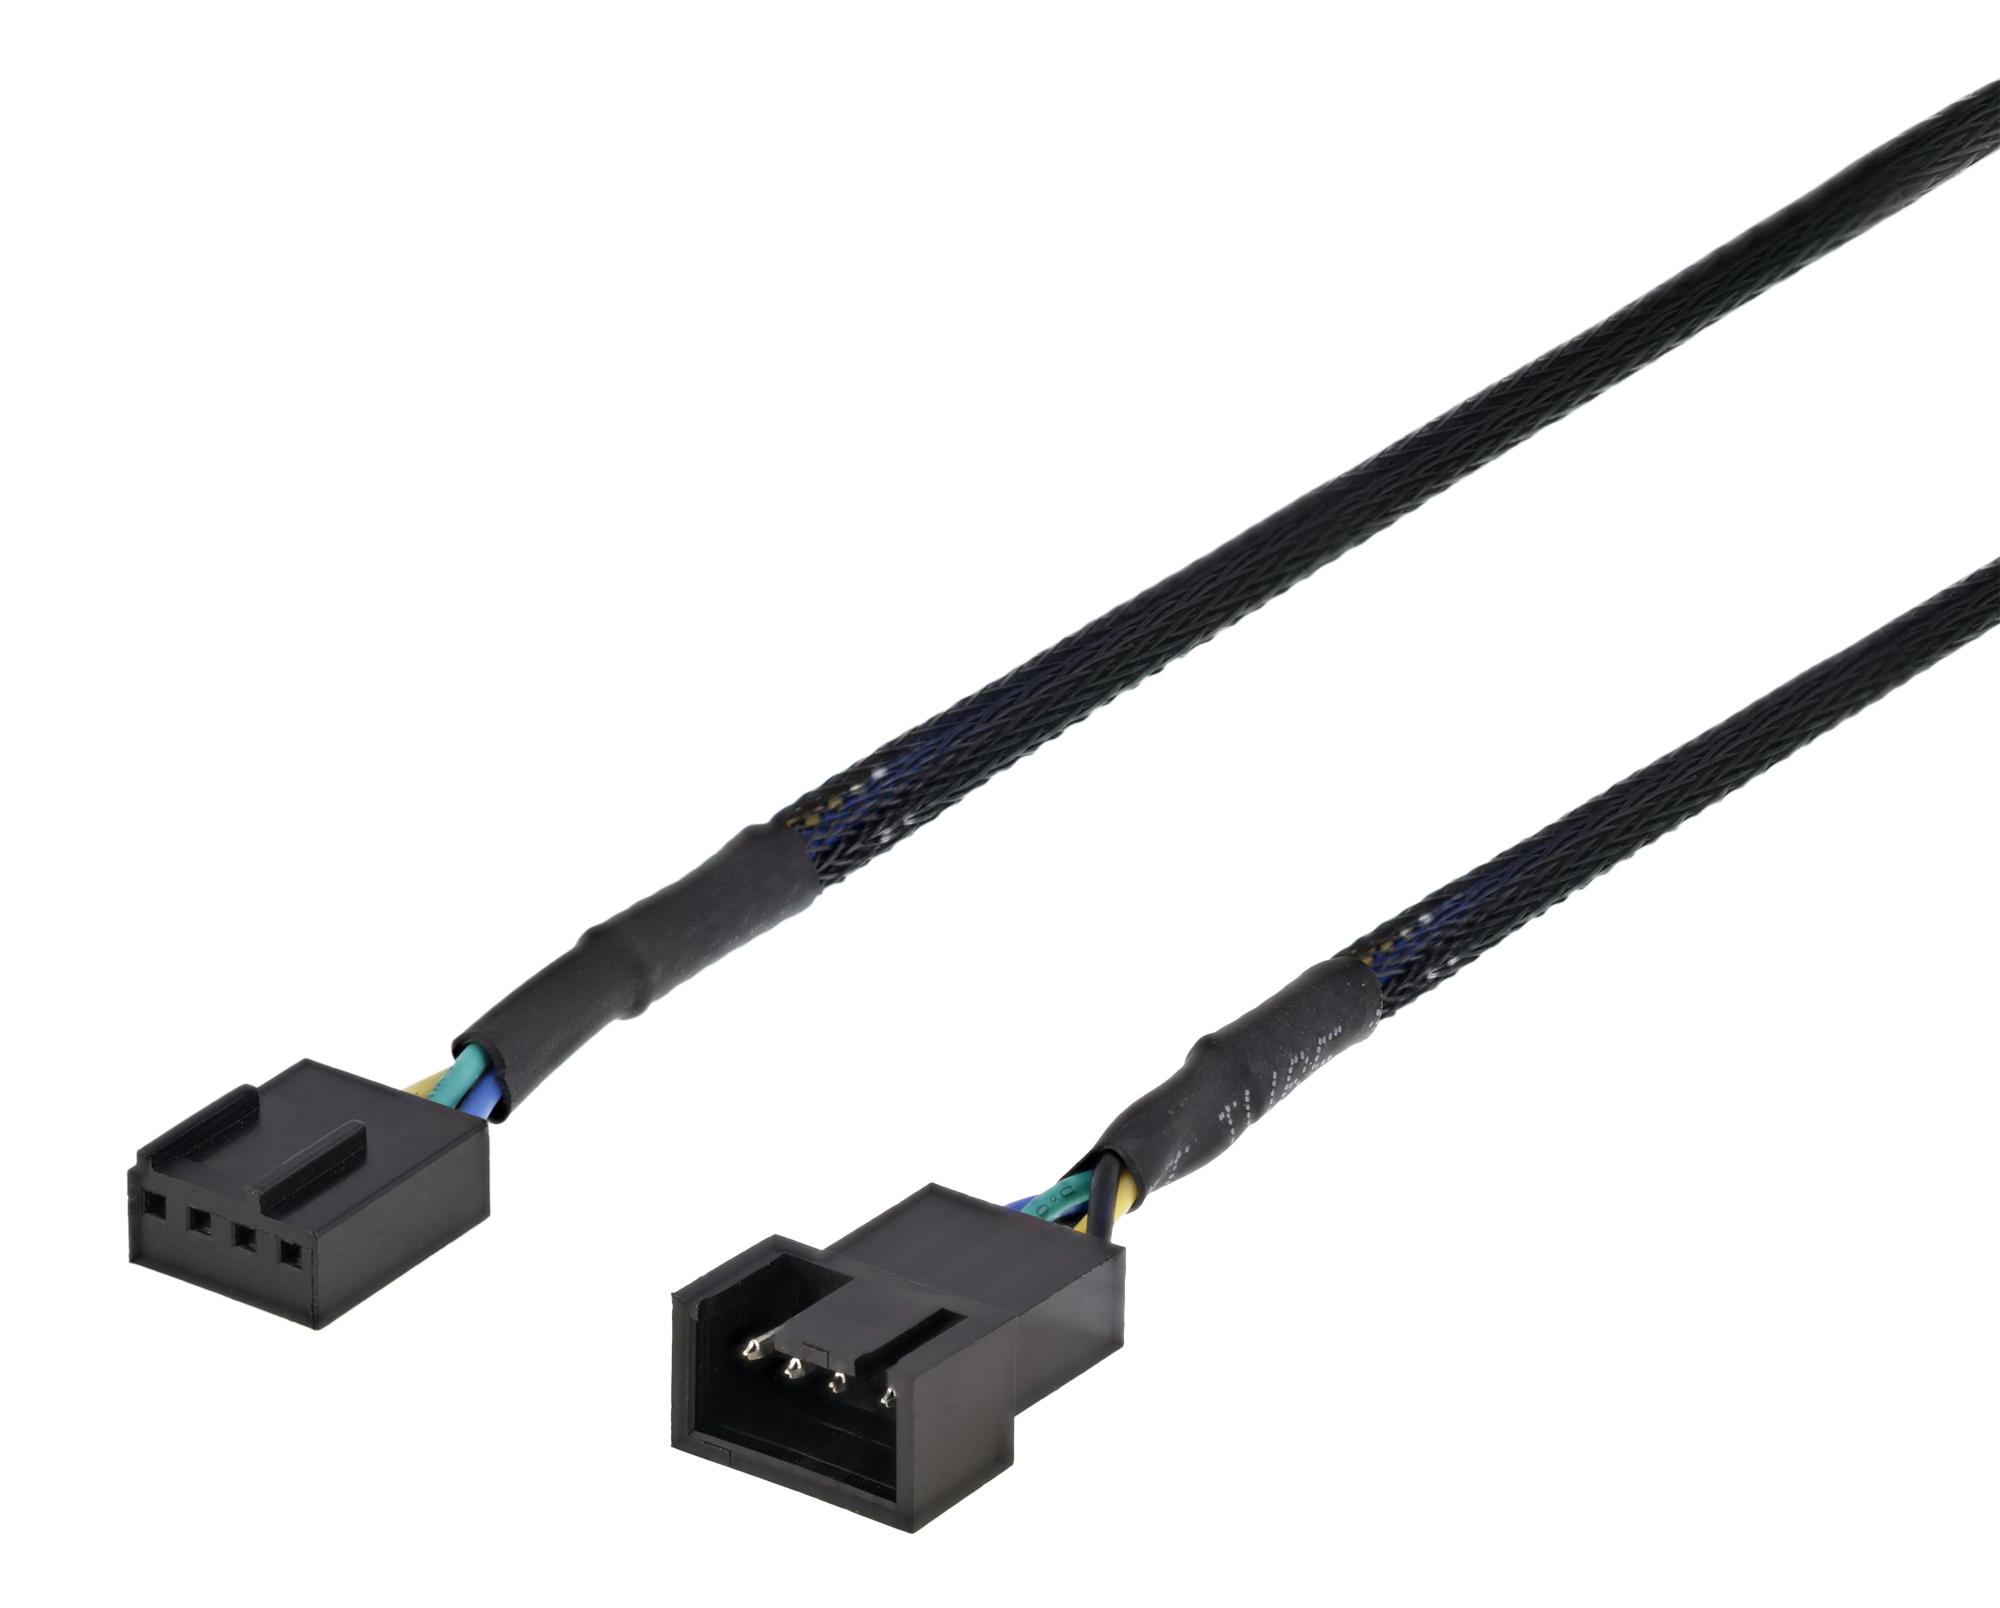 Extension cable for 4-pin fans 0.3m, black